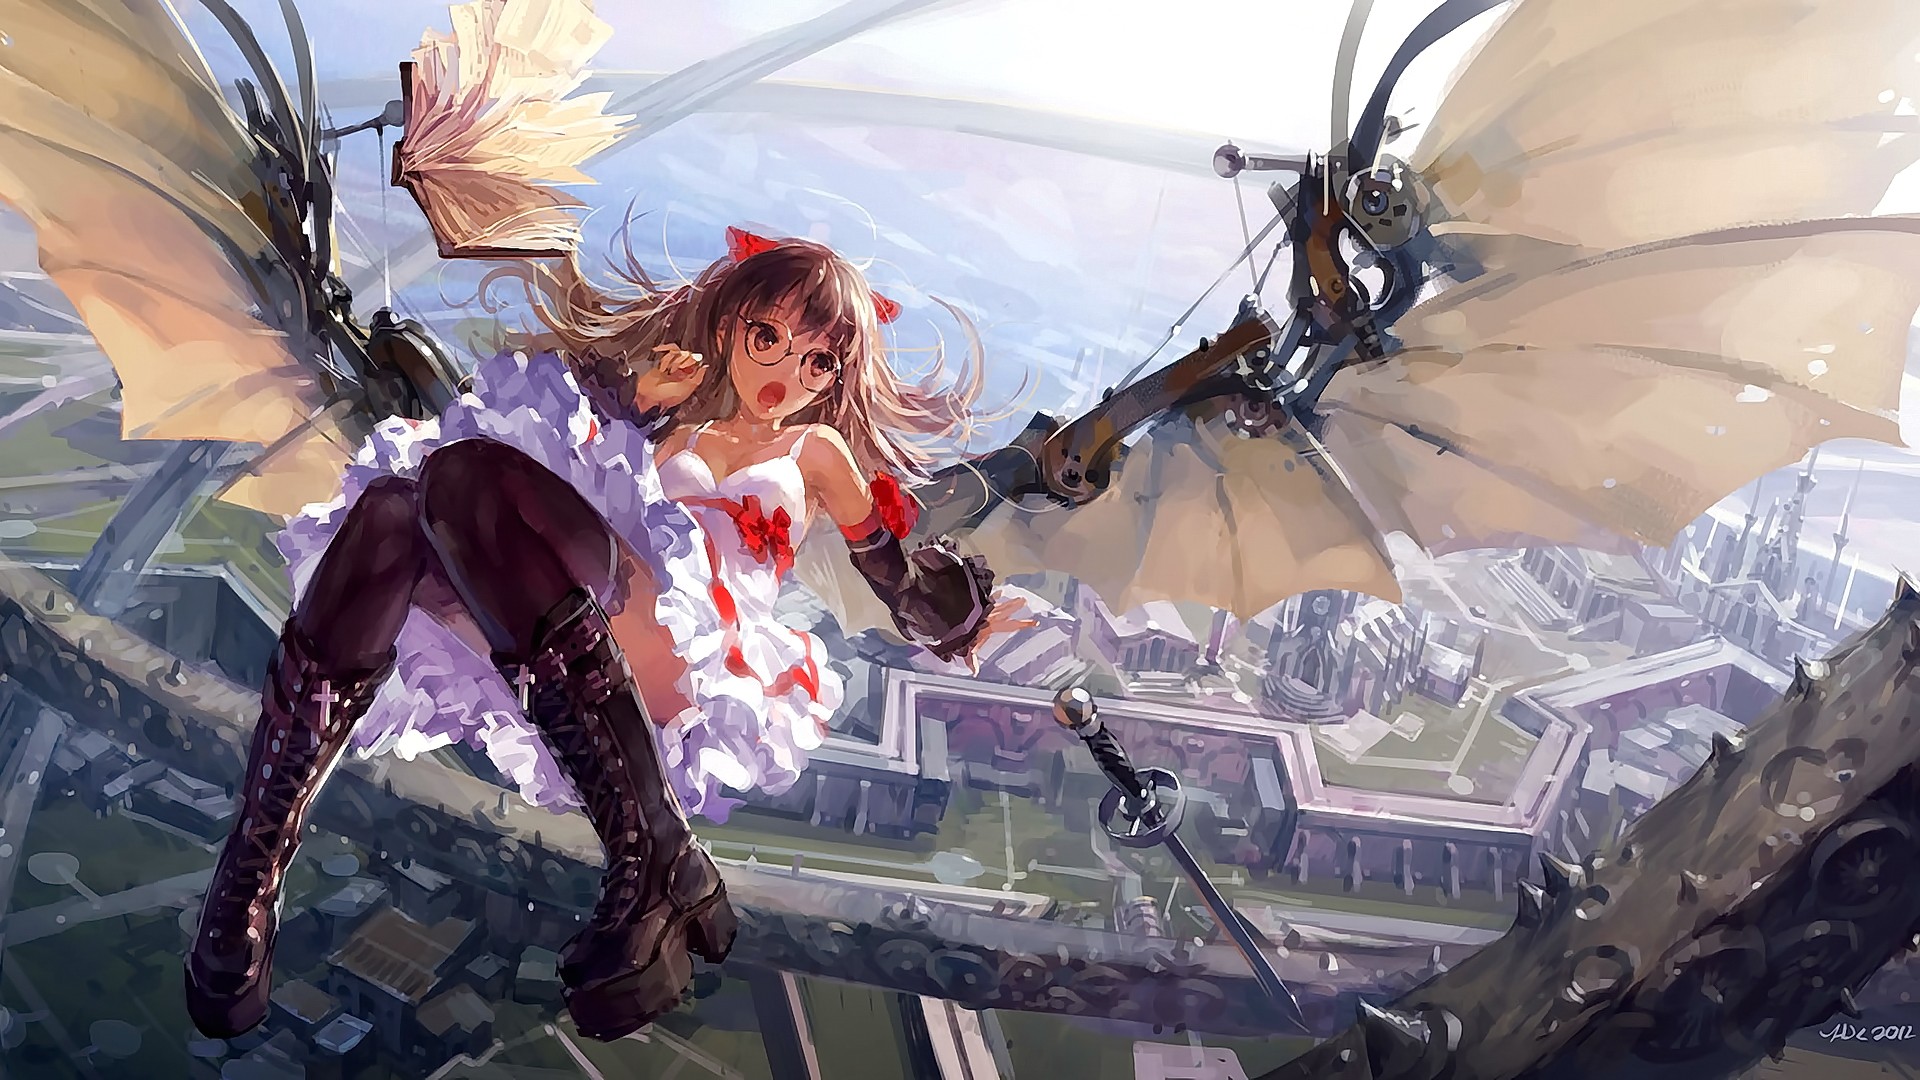 Anime 1920x1080 anime anime girls long hair brunette gray eyes looking away wings artwork fantasy art fantasy girl stockings boots sword open mouth women with glasses watermarked 2012 (Year)